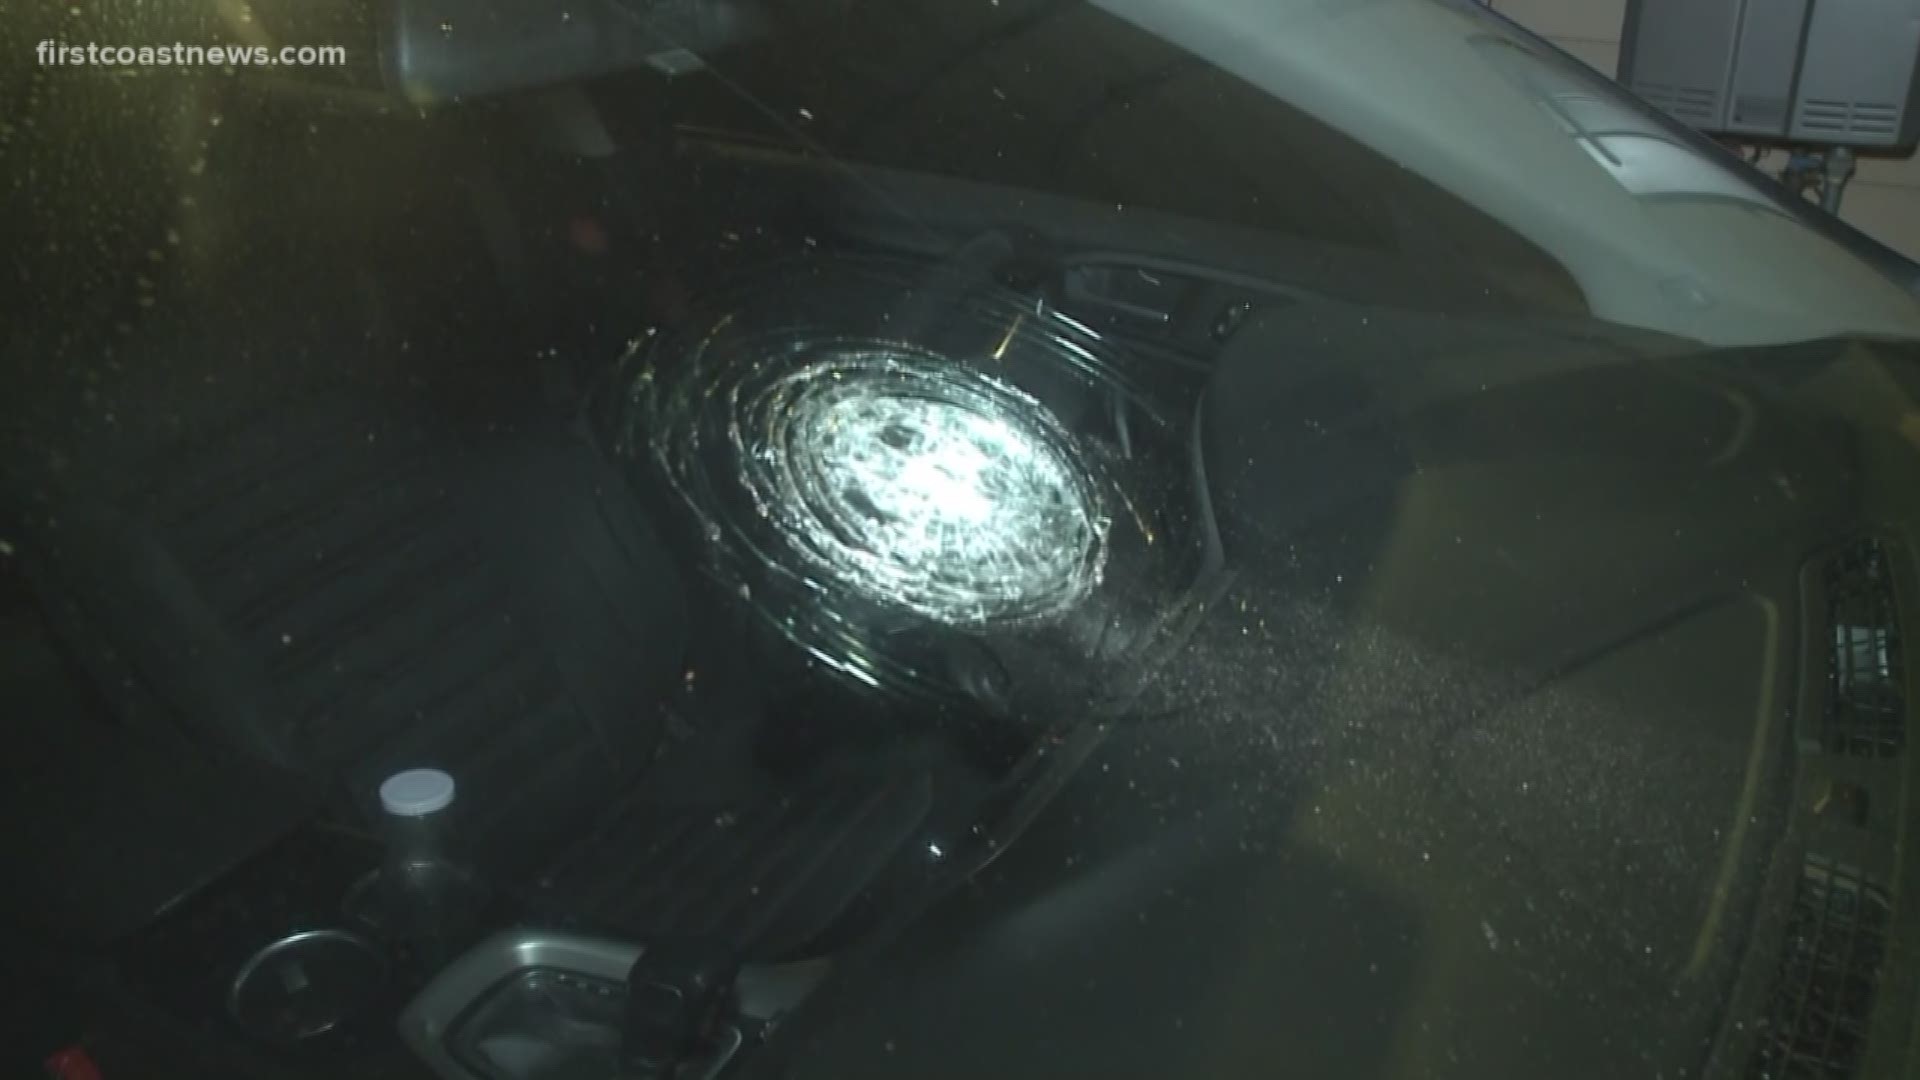 One Murray Hill man started his new year out with a bang, quite literally, when he found a bullet hit his car.